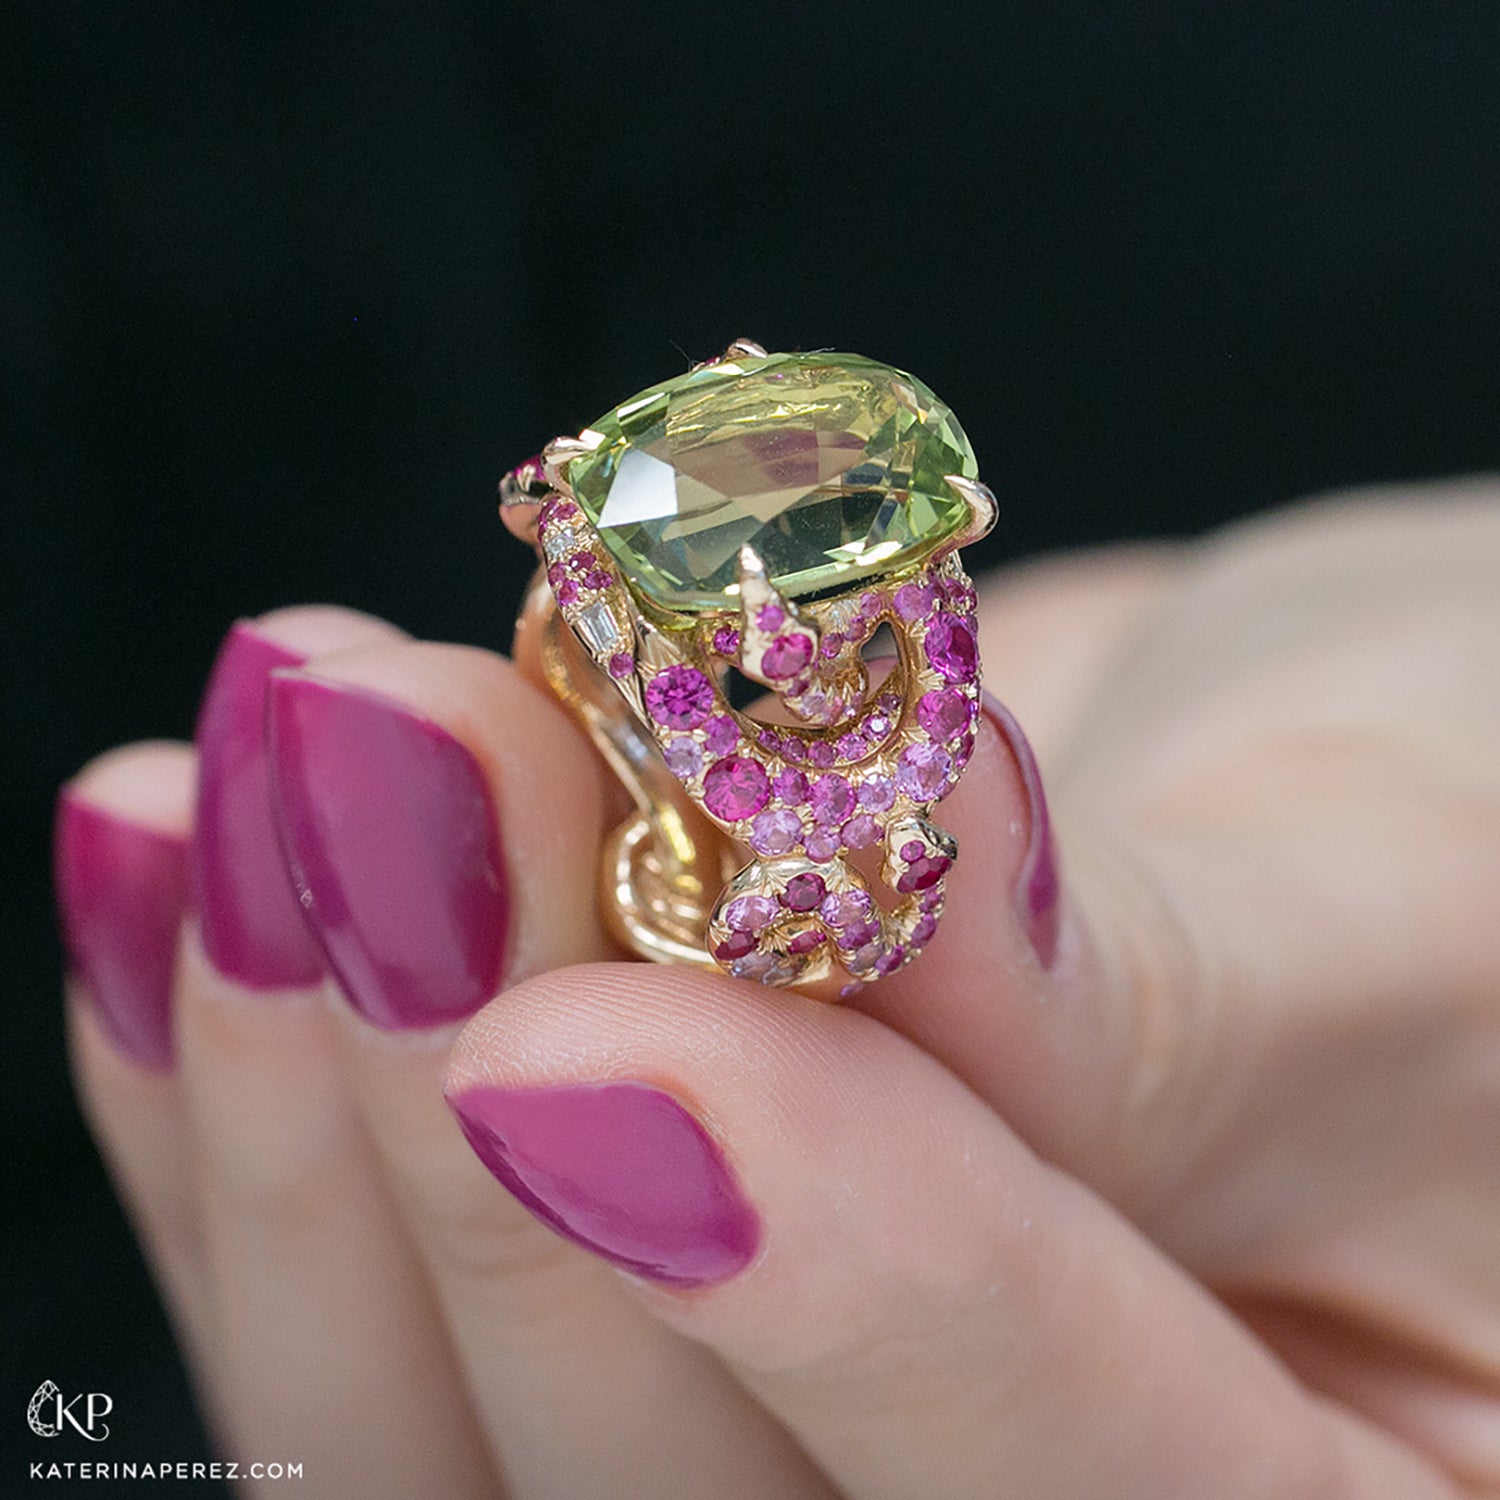 Ring "4 Snakes" Pink Gold with a Green Chrysoberyll, Pink Sapphires and White Diamonds